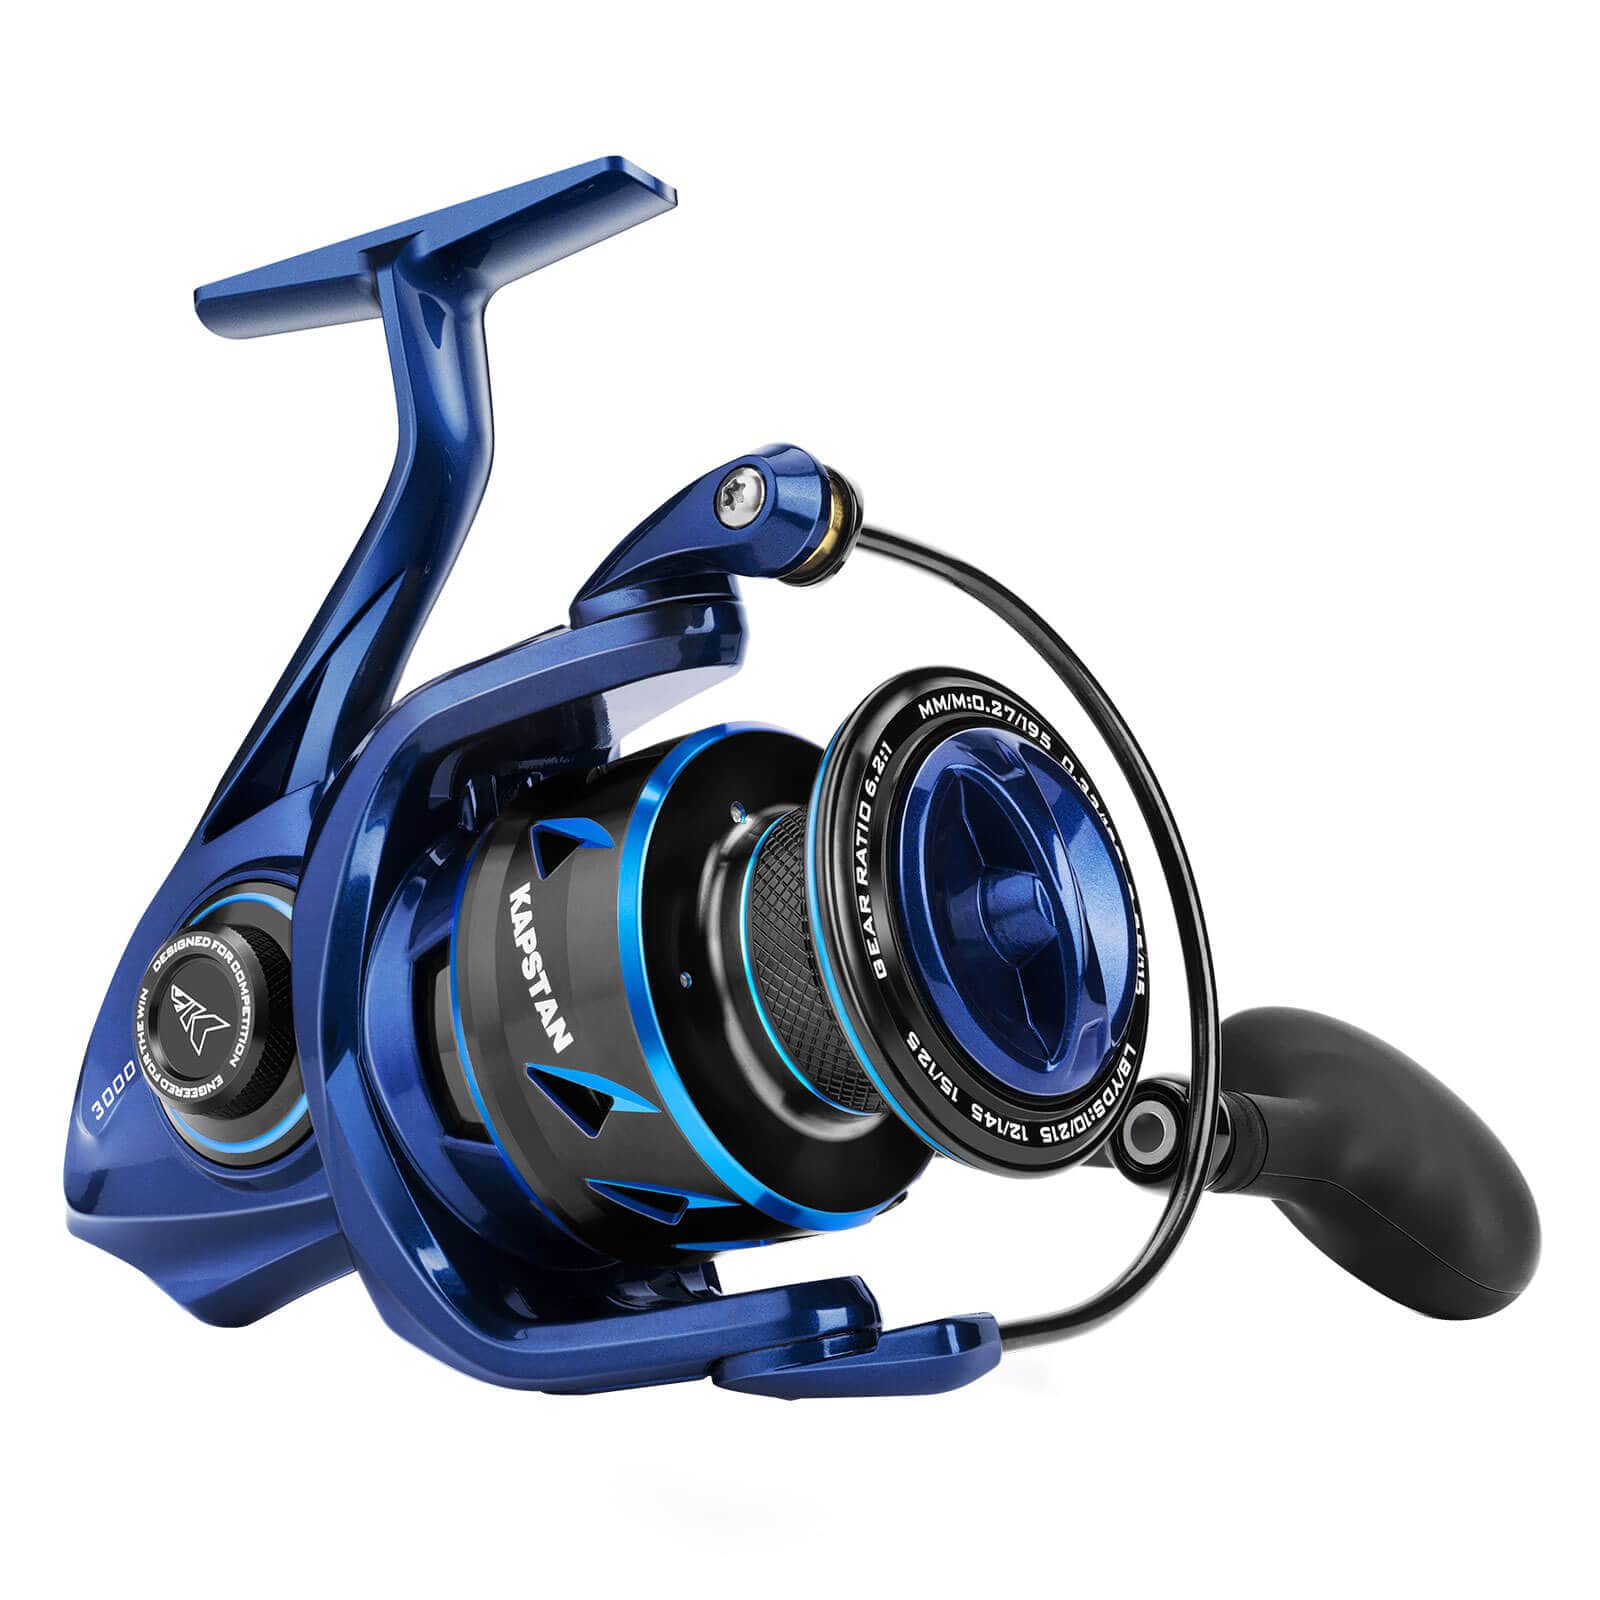 Kastking Summer 3000 Spinning Reel - Great Reel For a Tight/Small